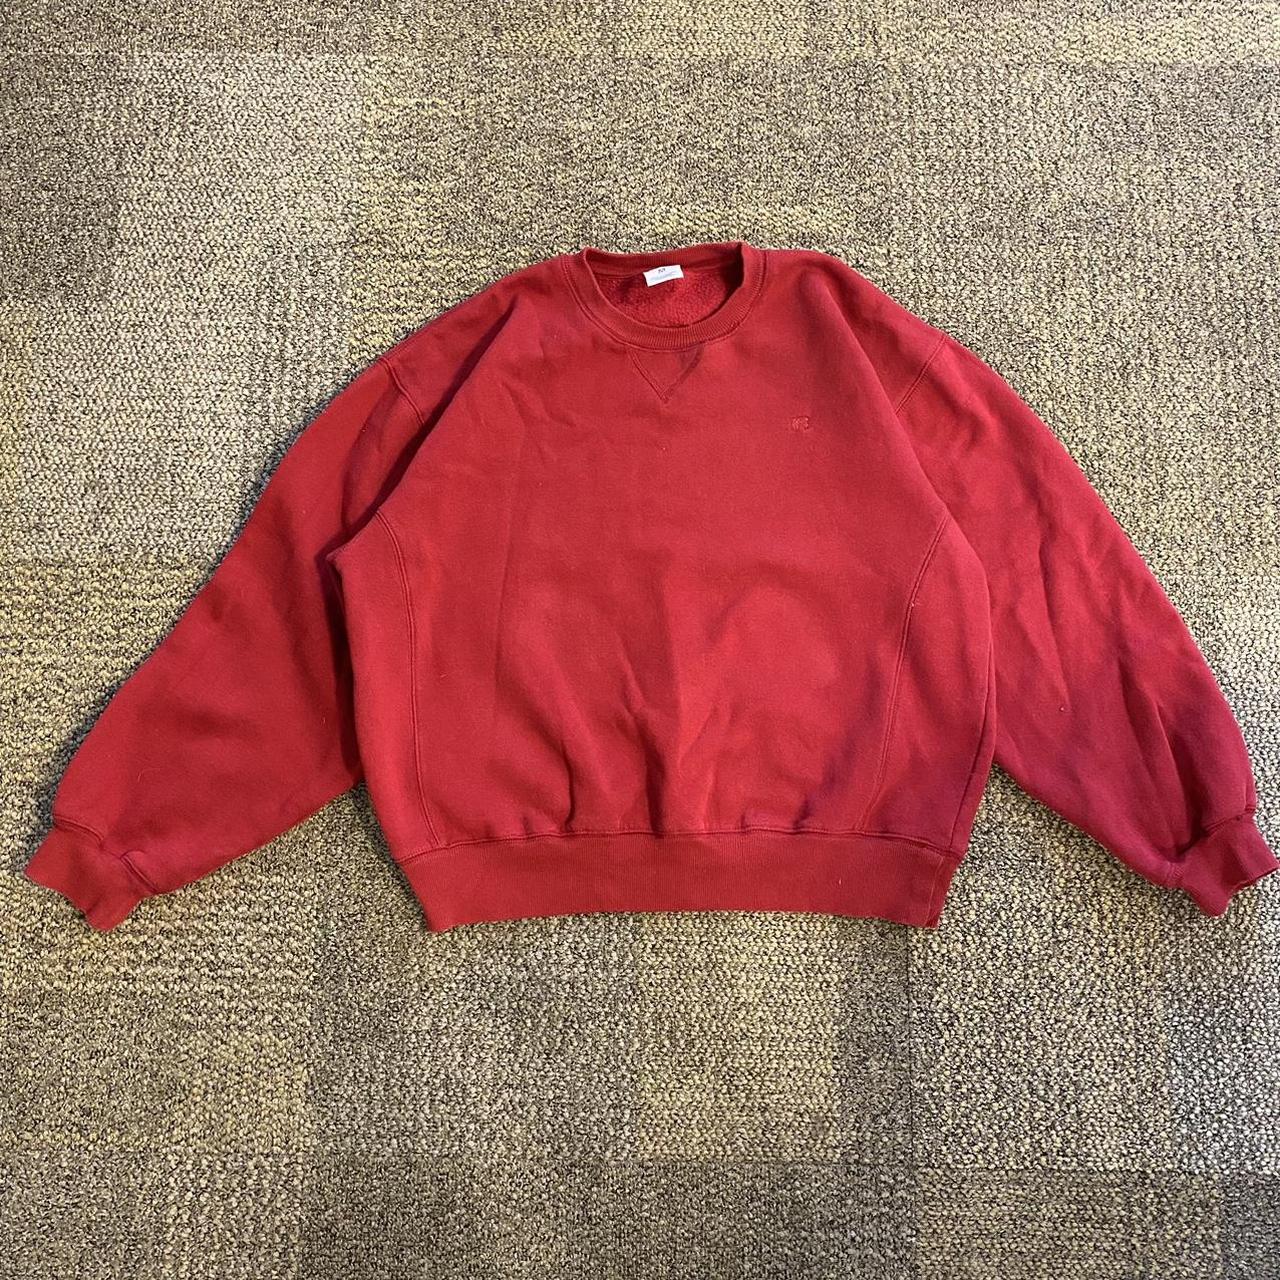 Vintage Boxy Russell Sweater. No flaws 9/10... - Depop